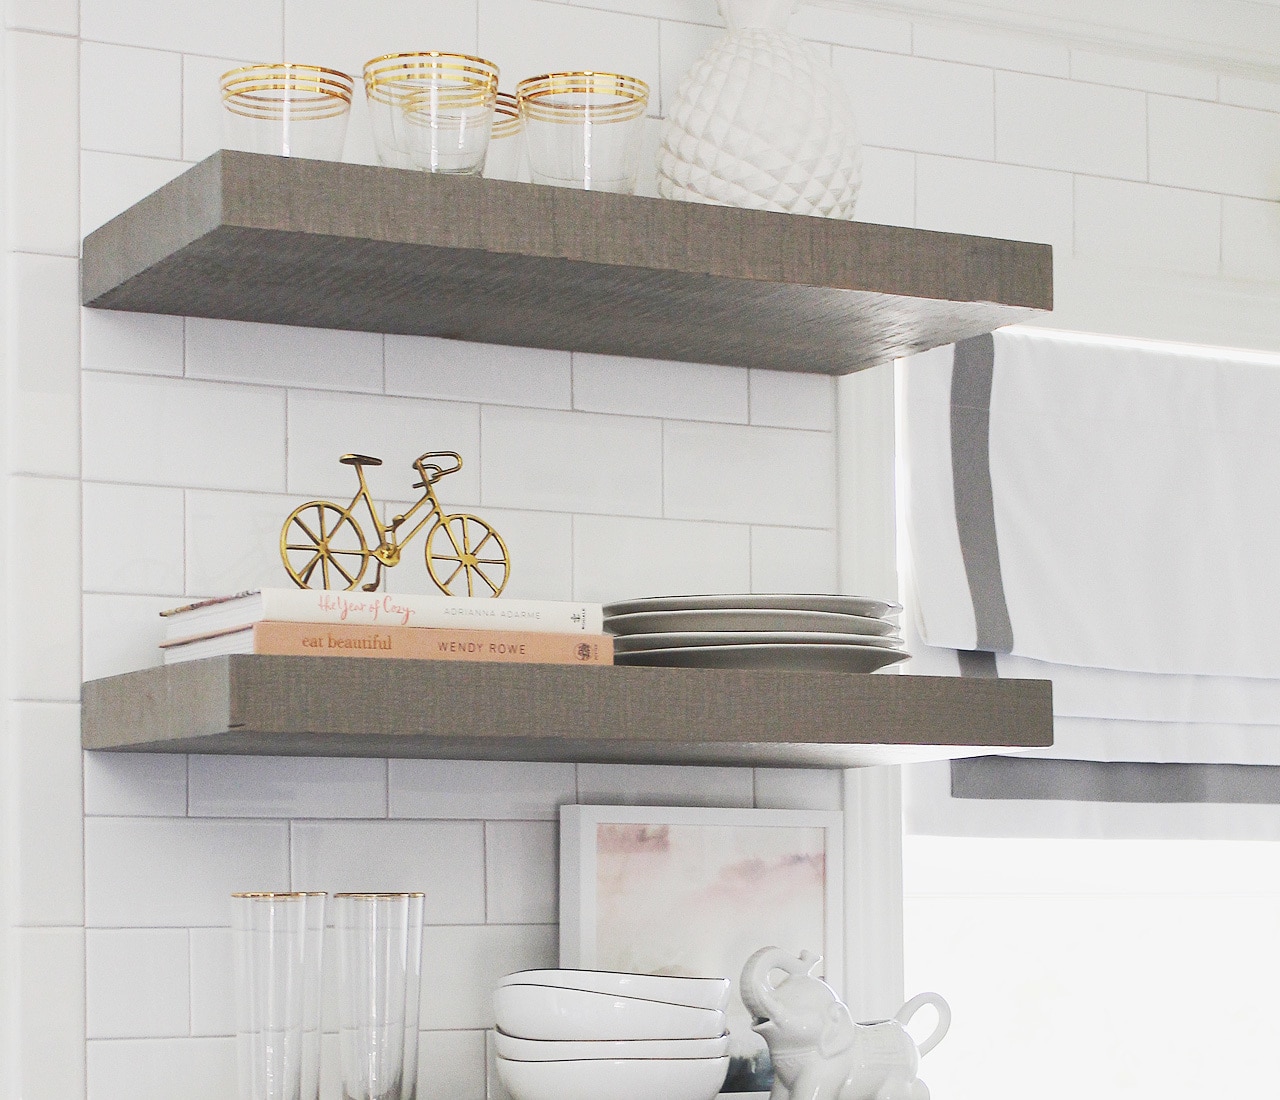 floating shelf bracket fits inch shelves gray kitchen light brackets easily install with our steel countertop bathroom unit wide shelving plans wall extra storage cabinet desk